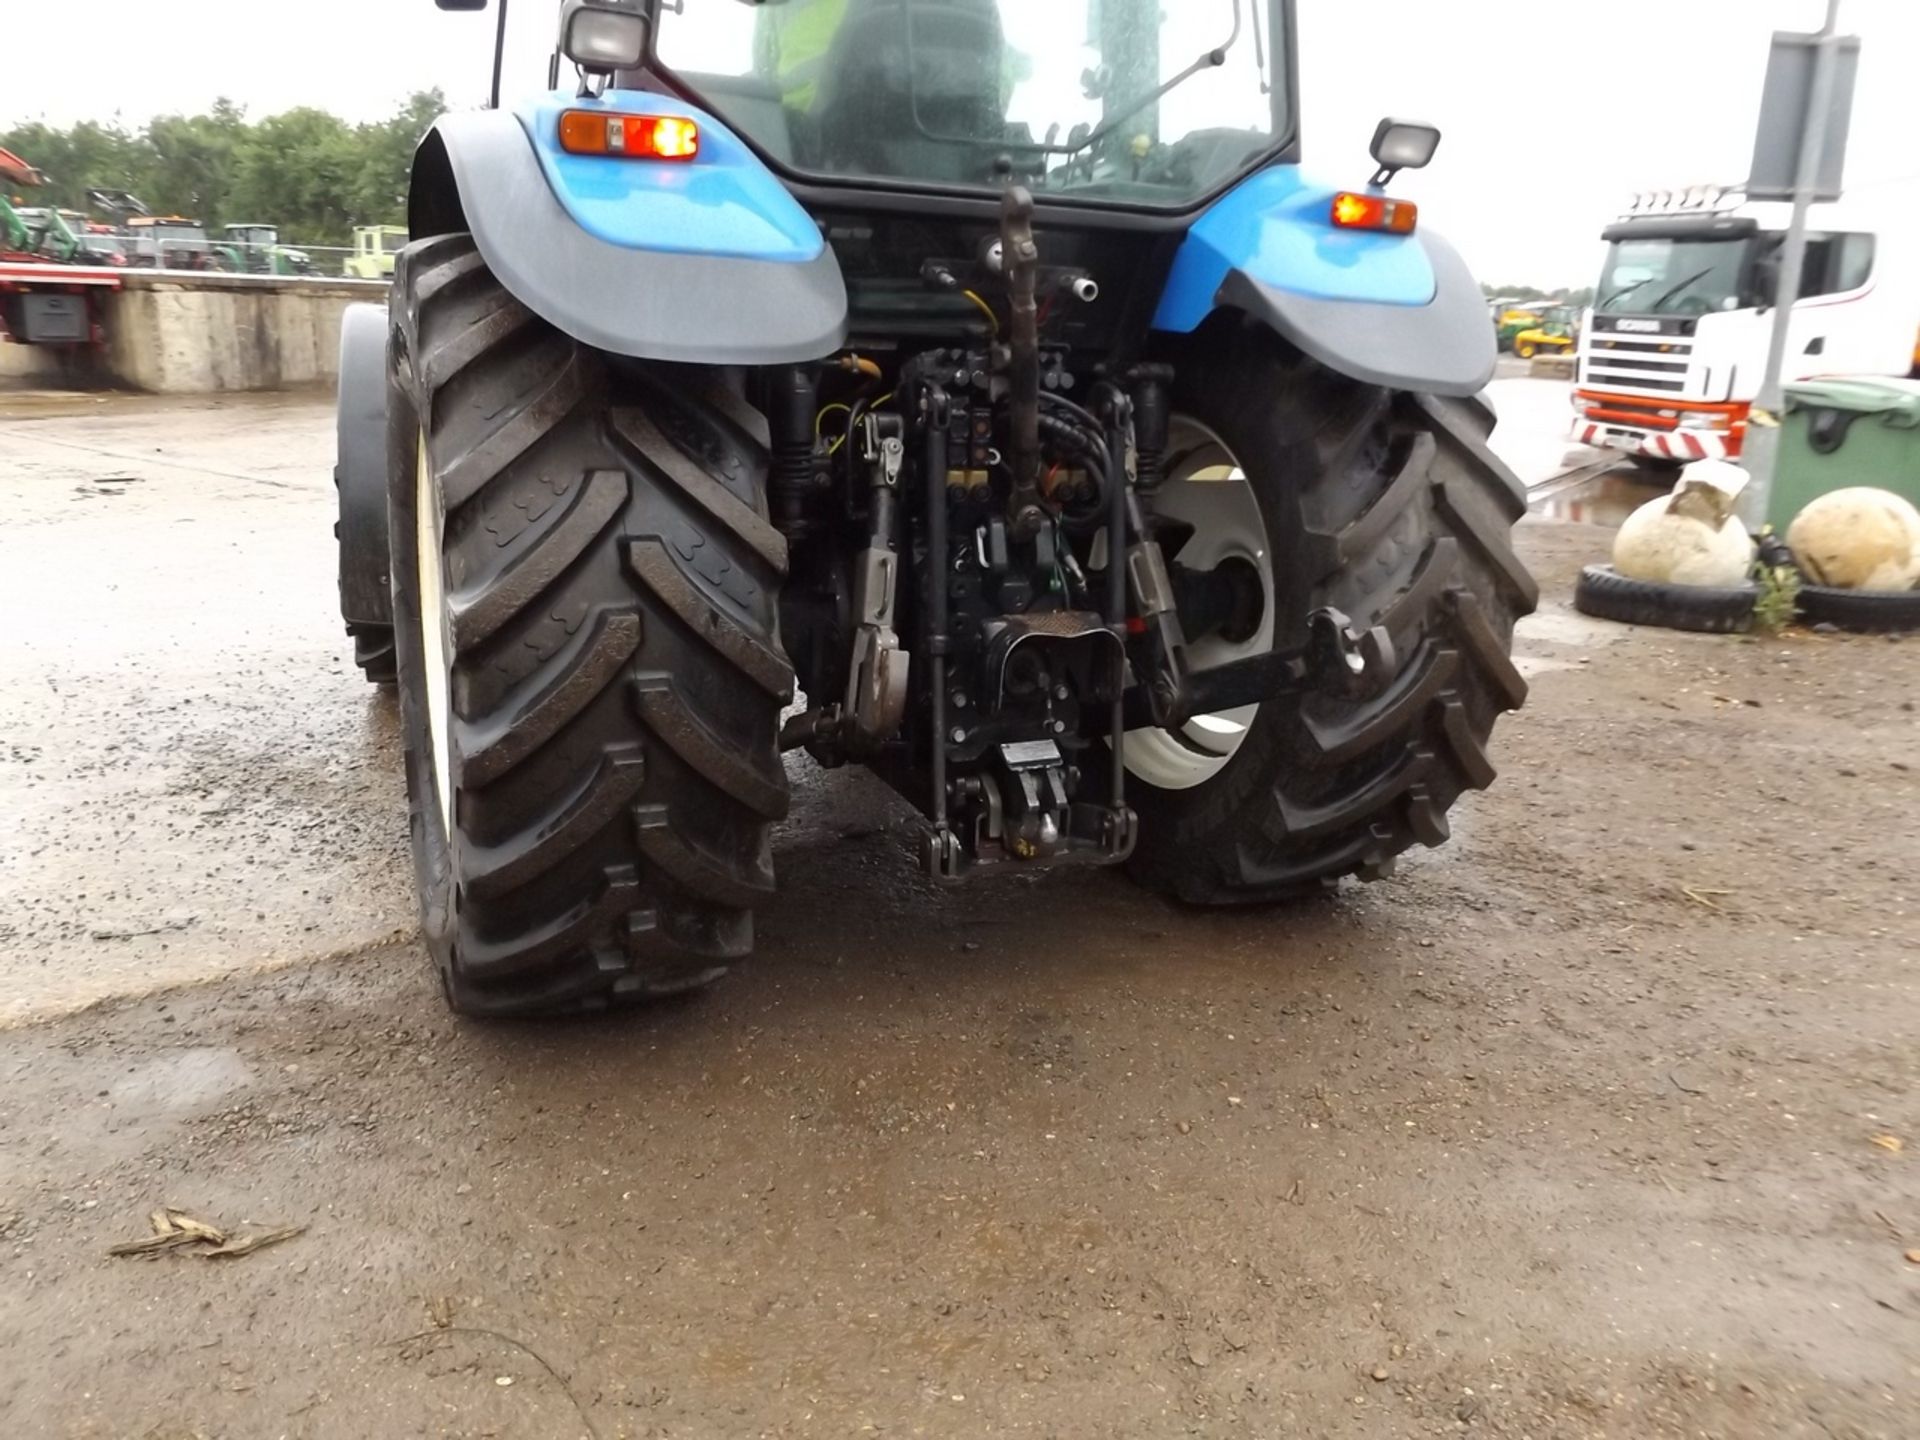 New Holland TM130 Range Command Tractor with Air Brakes. V5 will be supplied. Reg.No. MX57 GUE - Image 5 of 7